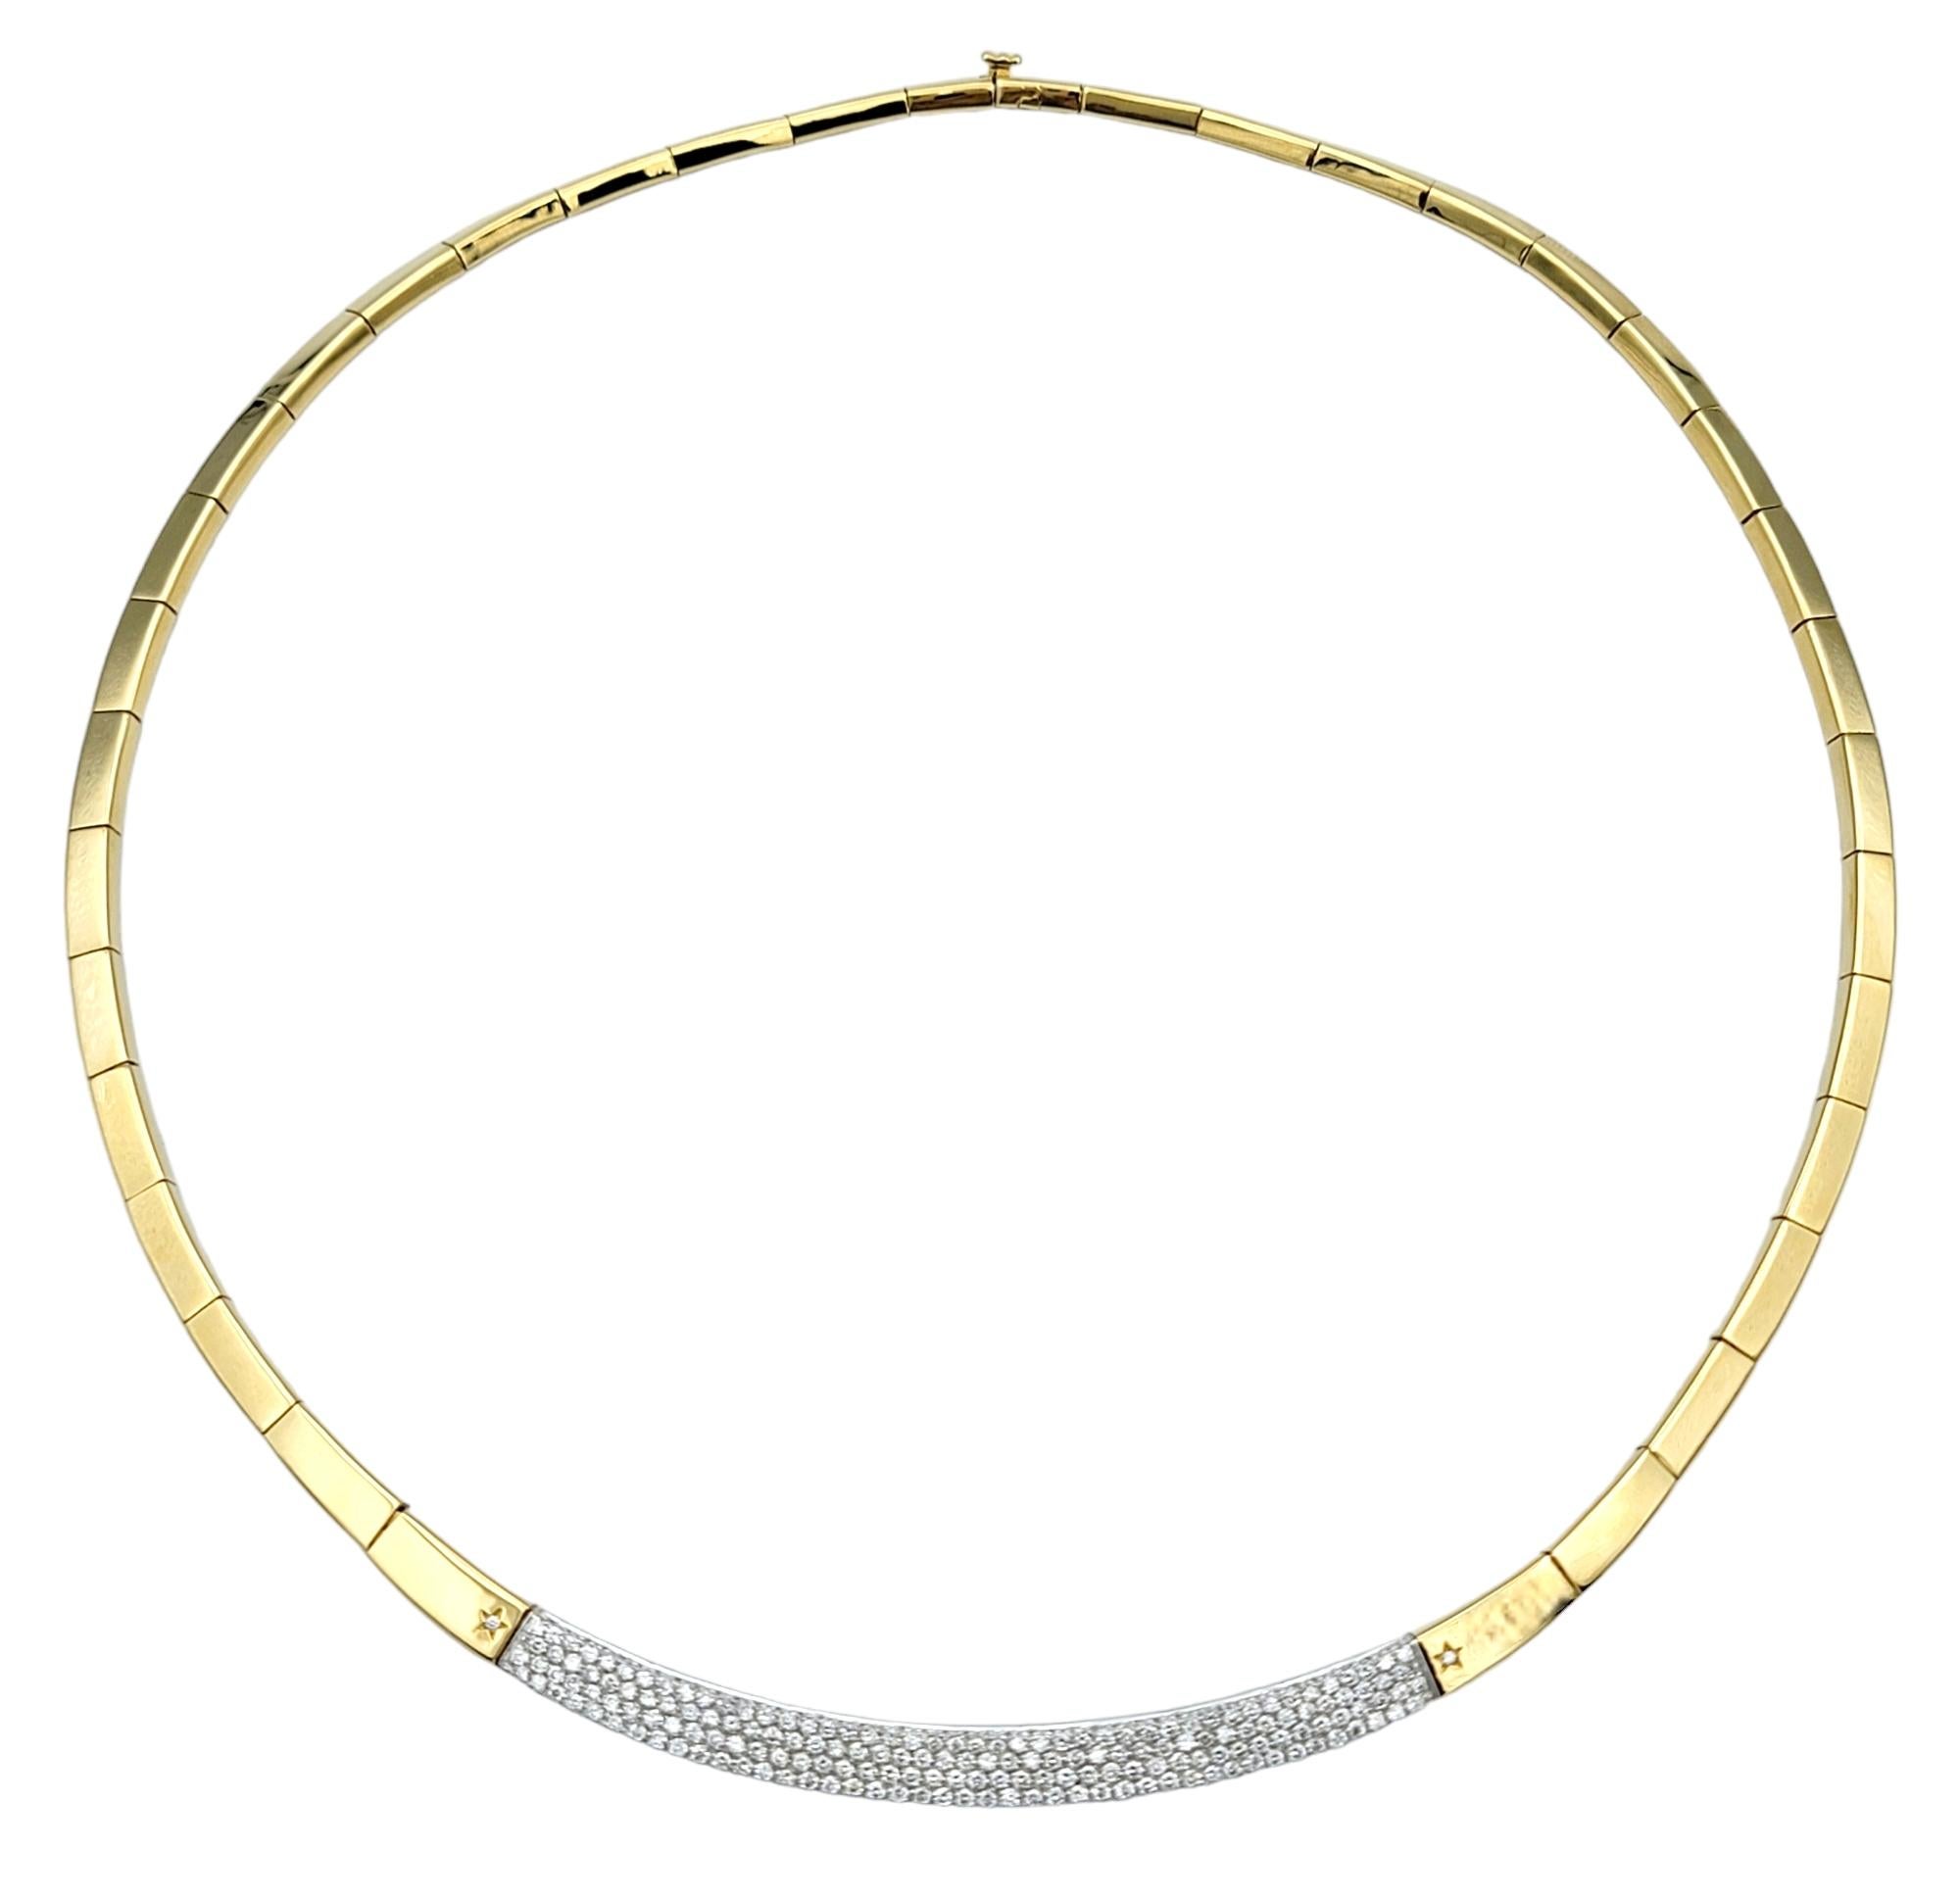 Exuding opulence and sophistication, this pave diamond collar necklace from H. Stern is a dazzling masterpiece set in radiant 18 karat yellow gold. The base of the necklace is meticulously embellished with a shimmering display of pave diamonds,